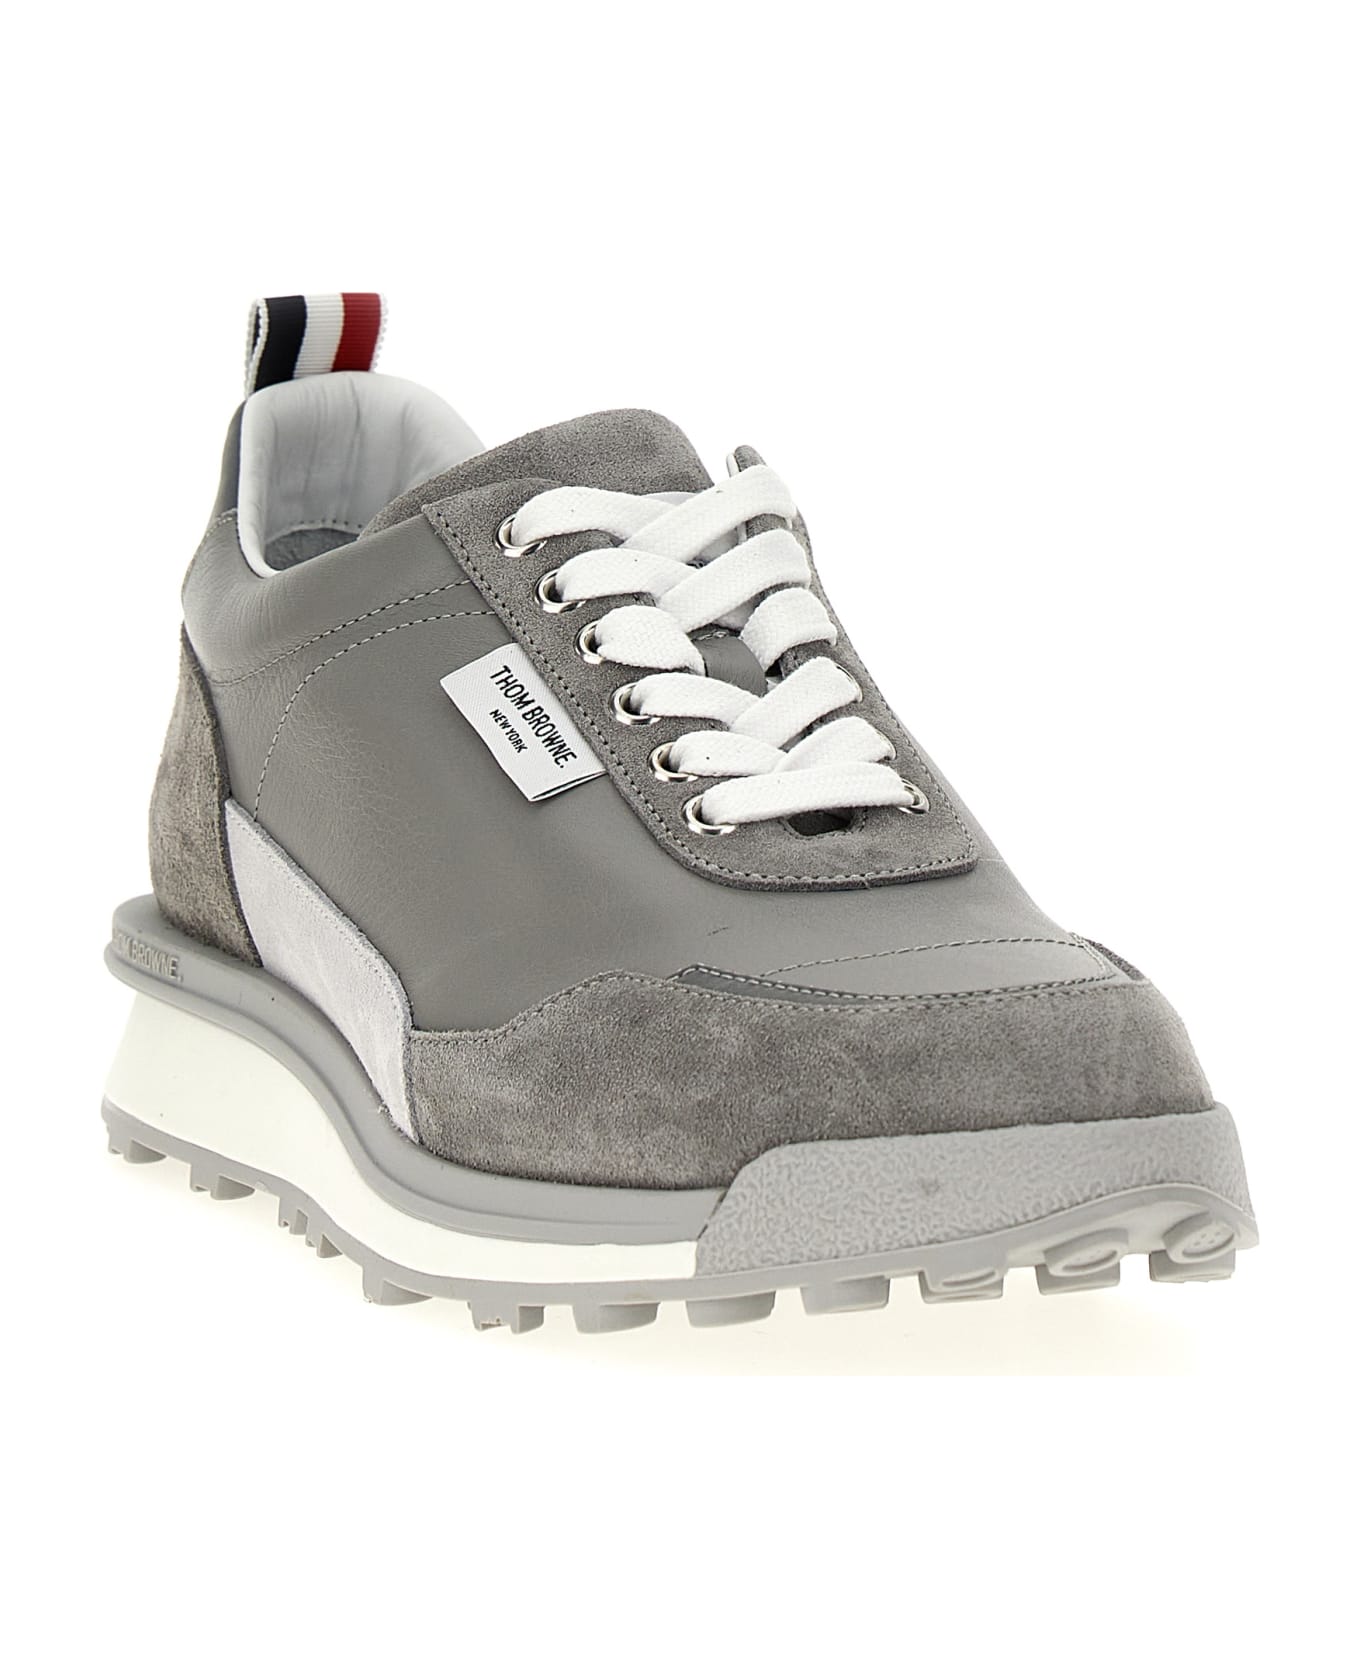 Thom Browne Sneaker With Logo - Total Grey